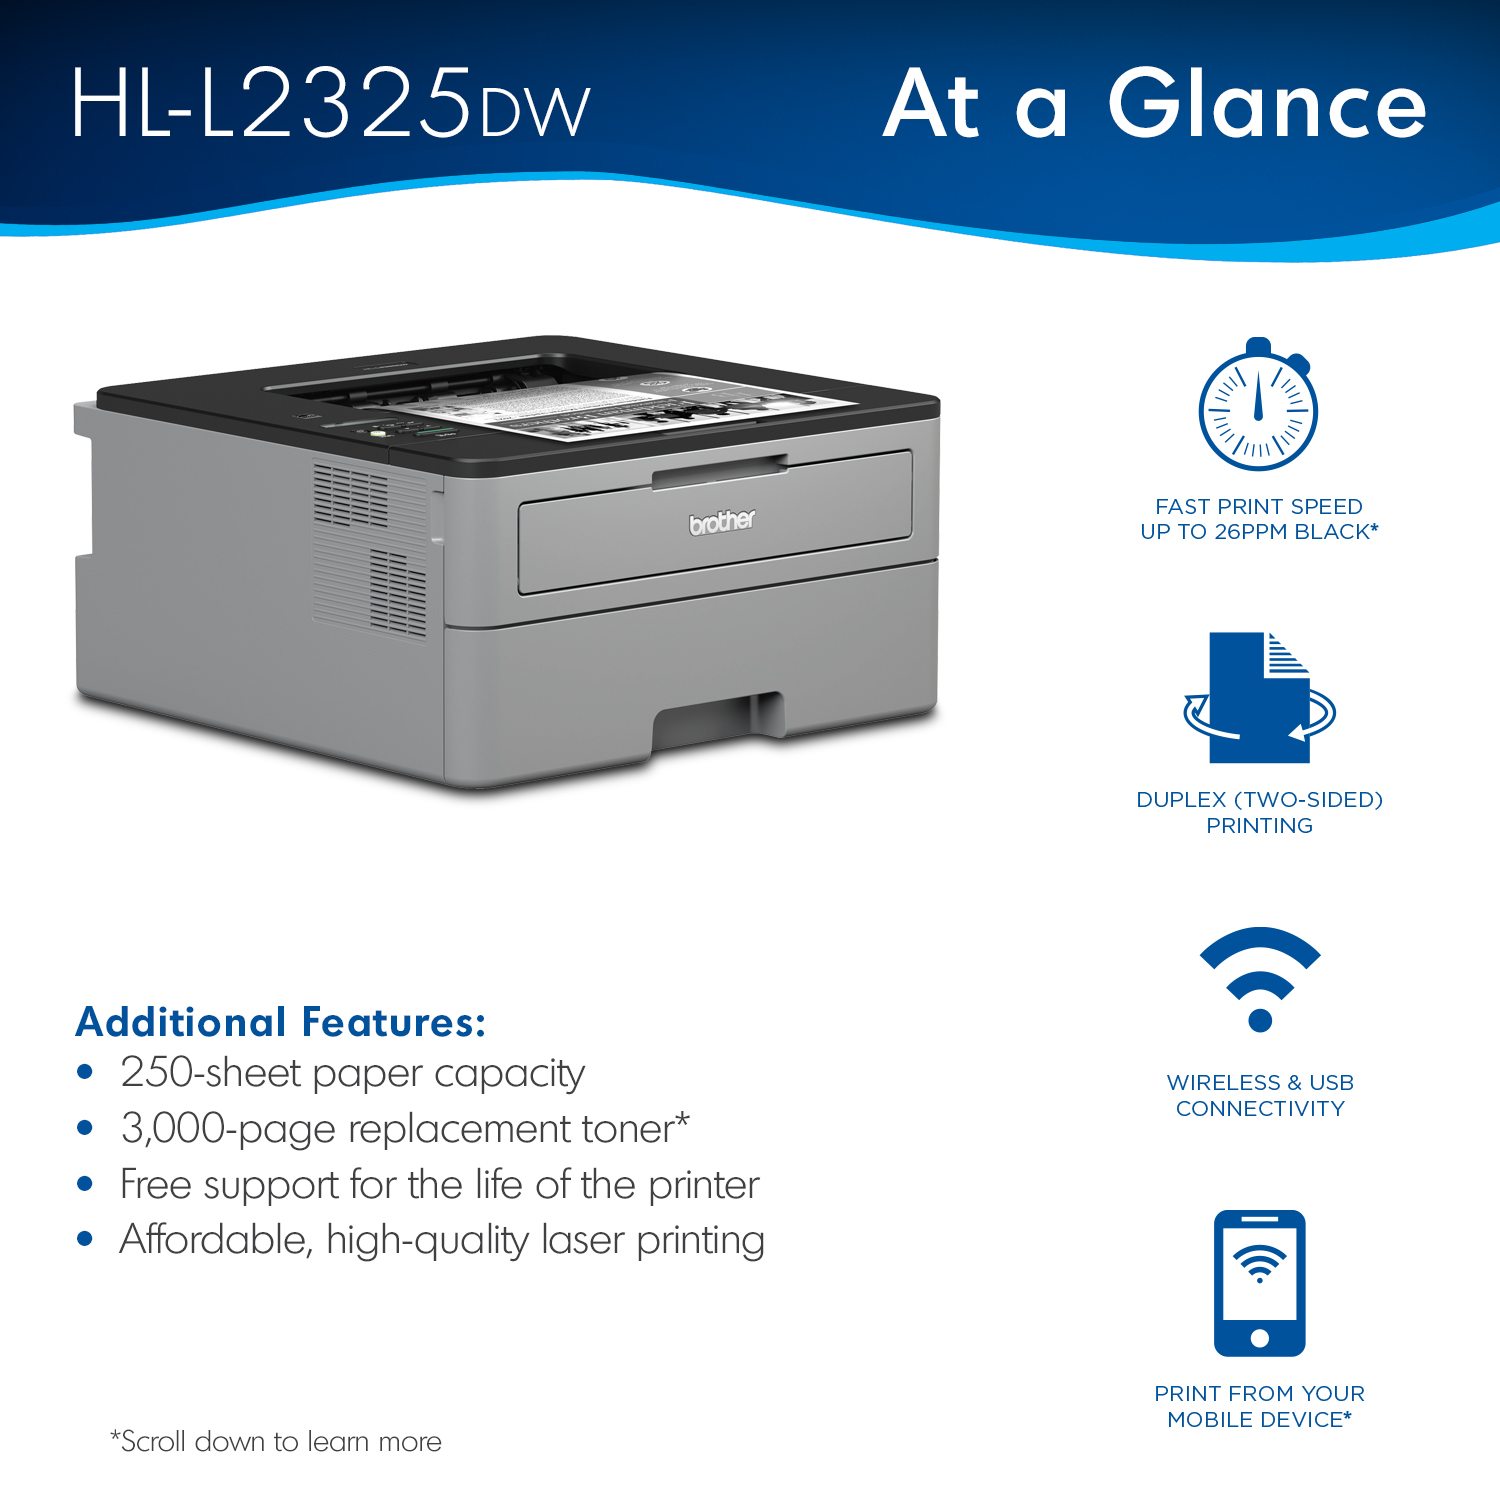 Brother HL-L2325DW Monochrome Laser Printer, Wireless Networking, Duplex Printing - image 3 of 8